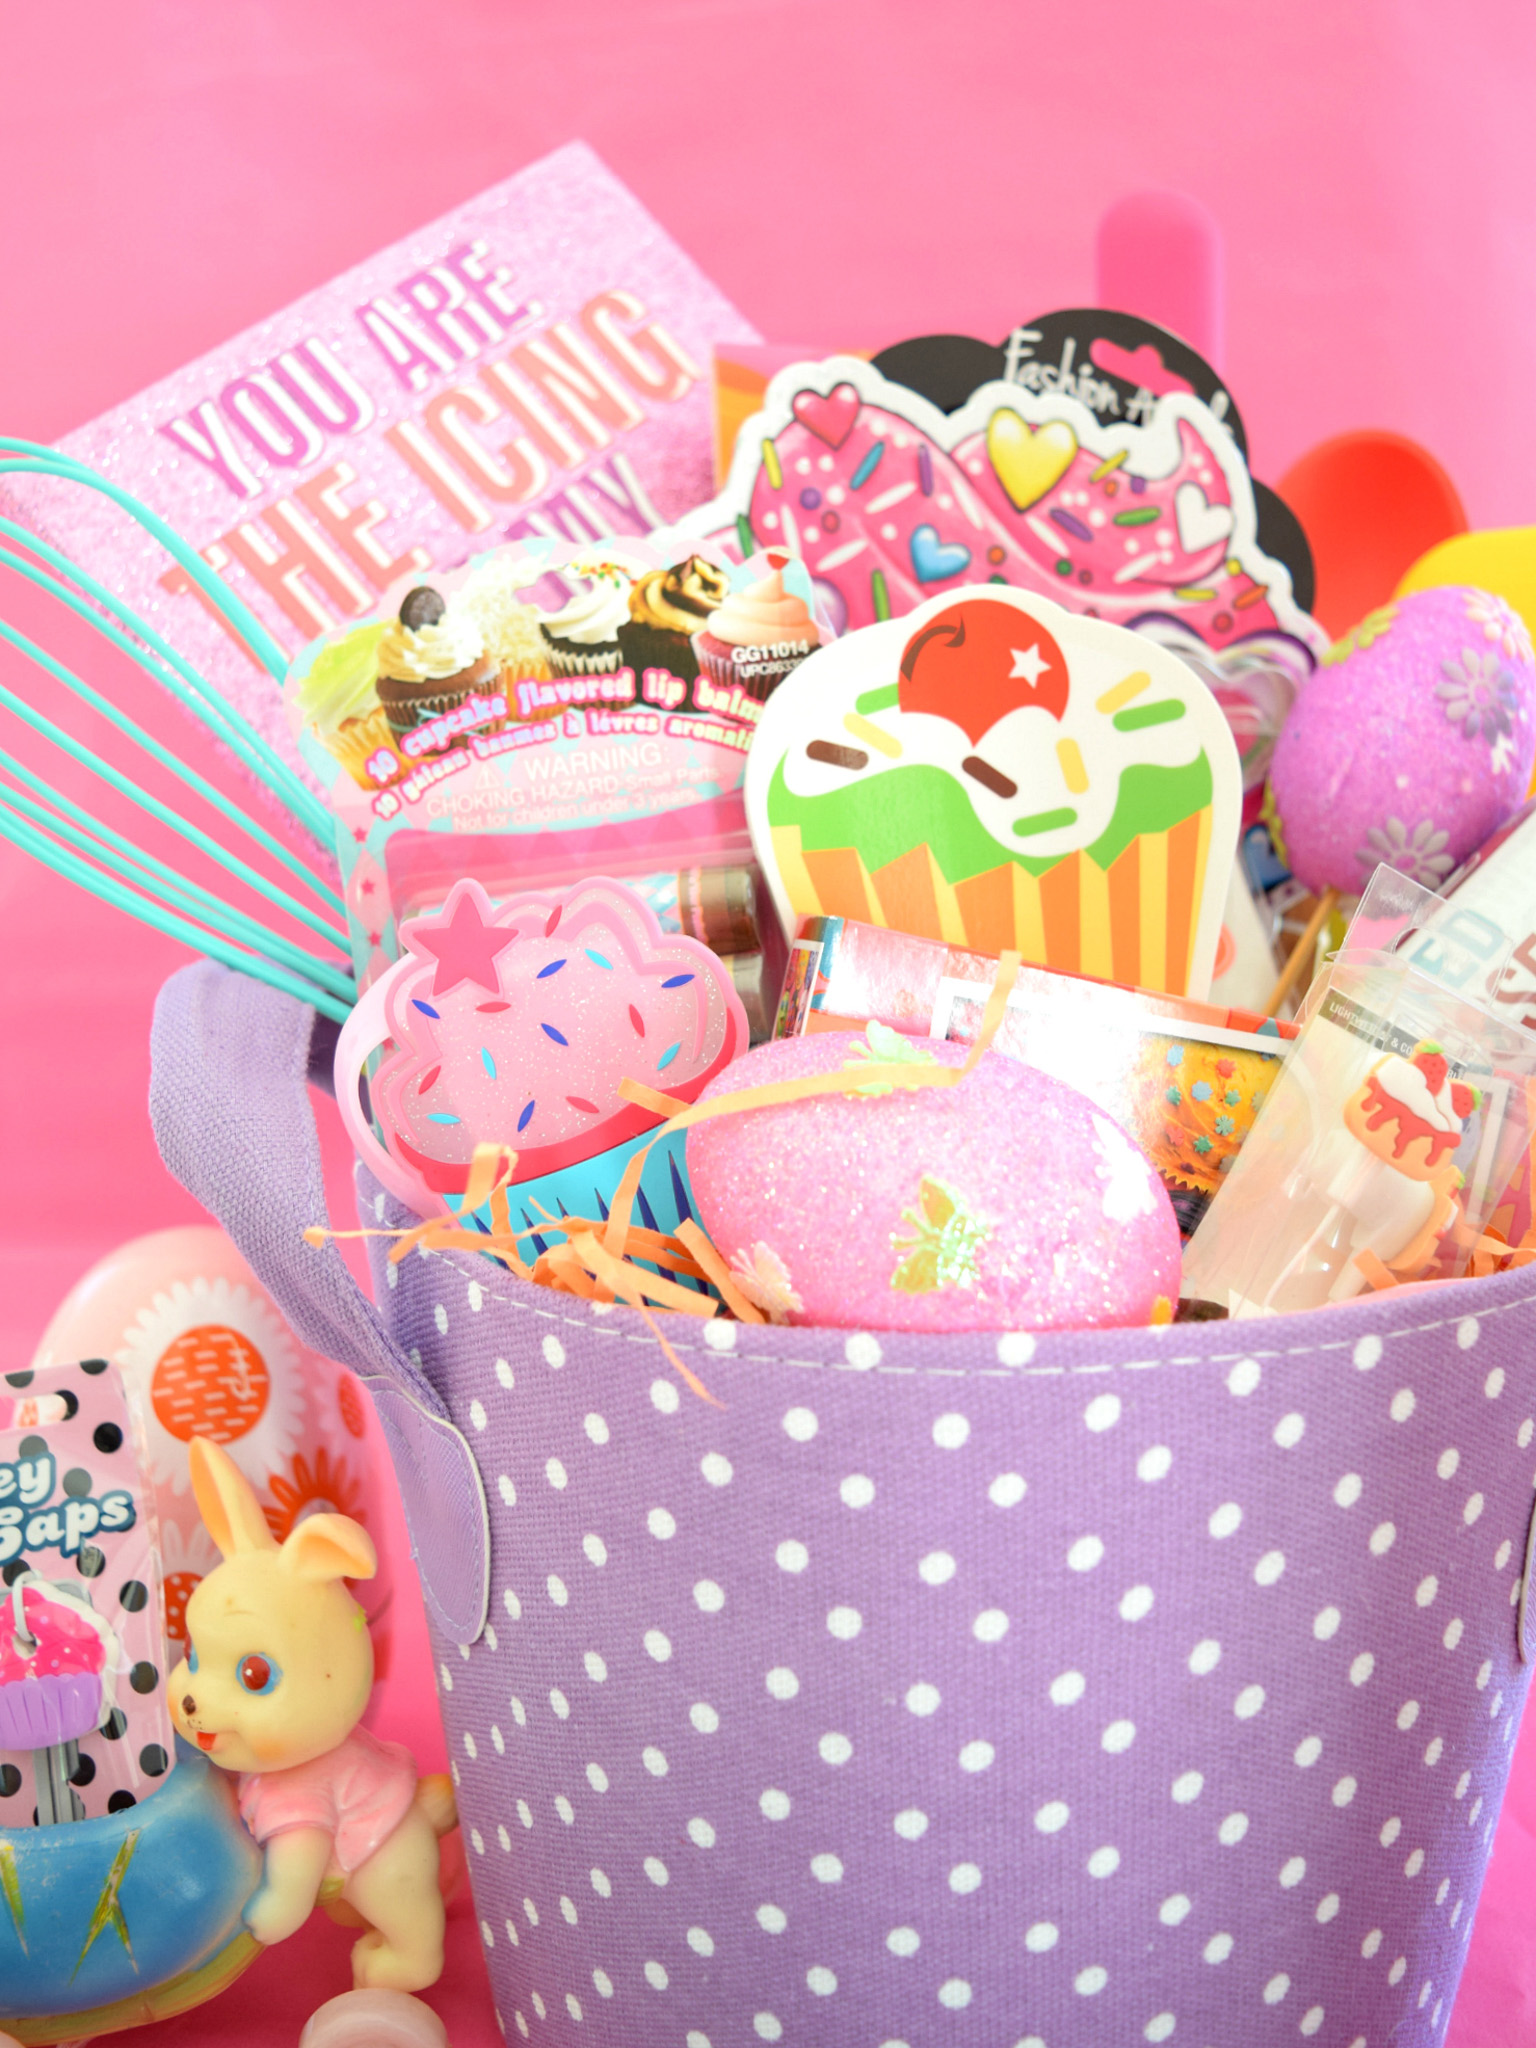 NUM NOMS SLIME LOTS OF FUN! BUBBLES GIRLS GIFT BASKET CANDY LAND 